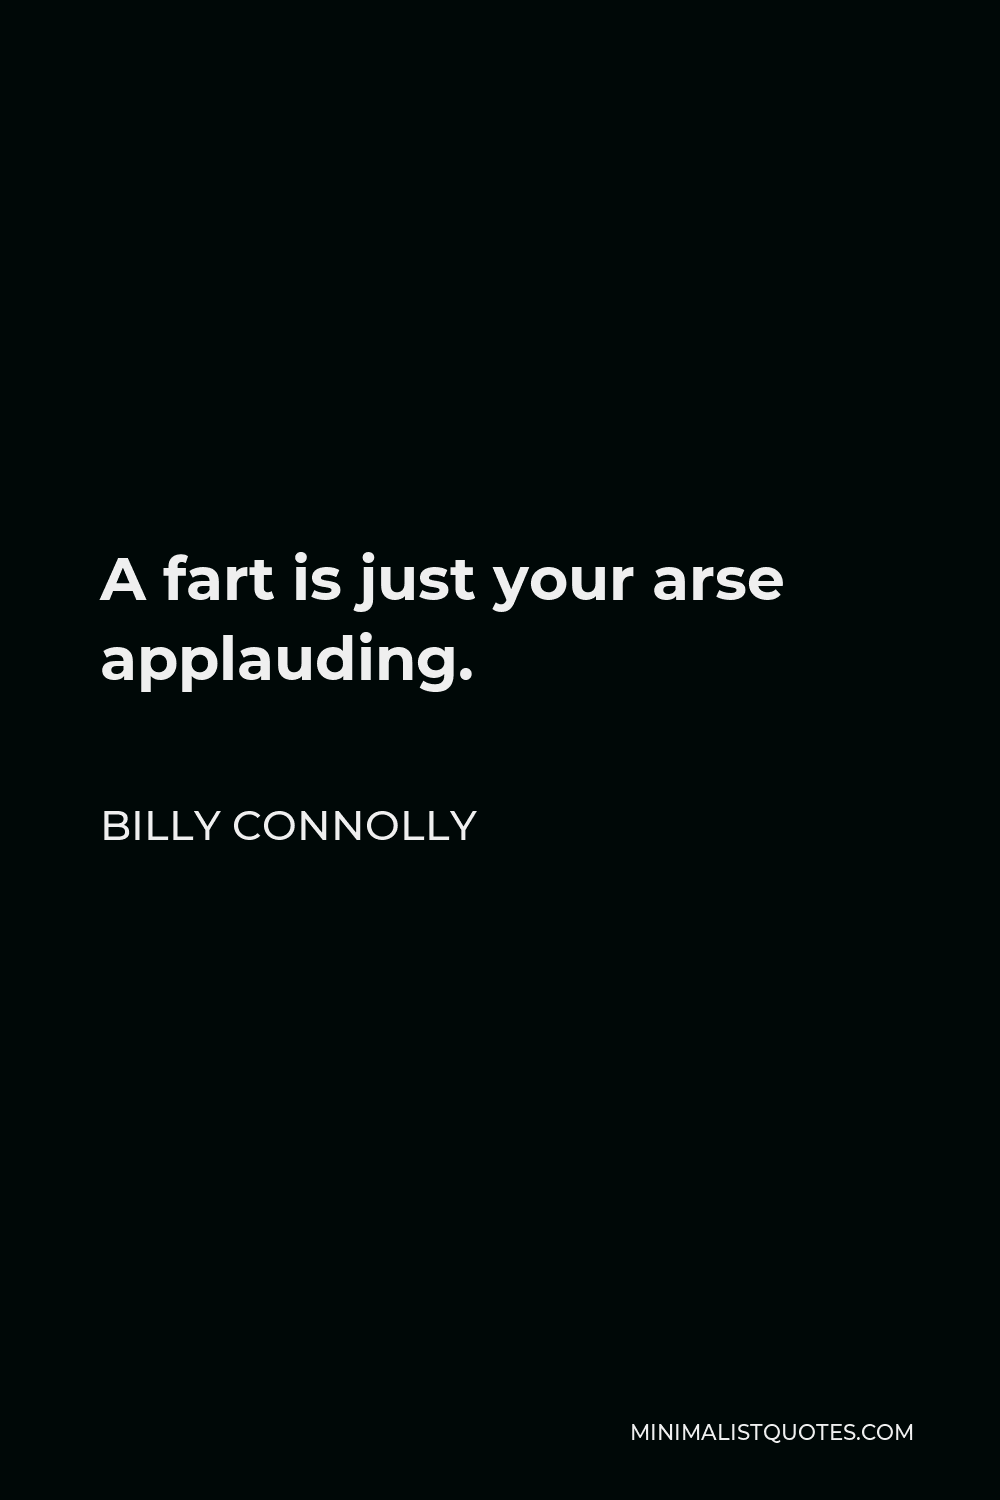 Billy Connolly Quote - A fart is just your arse applauding.